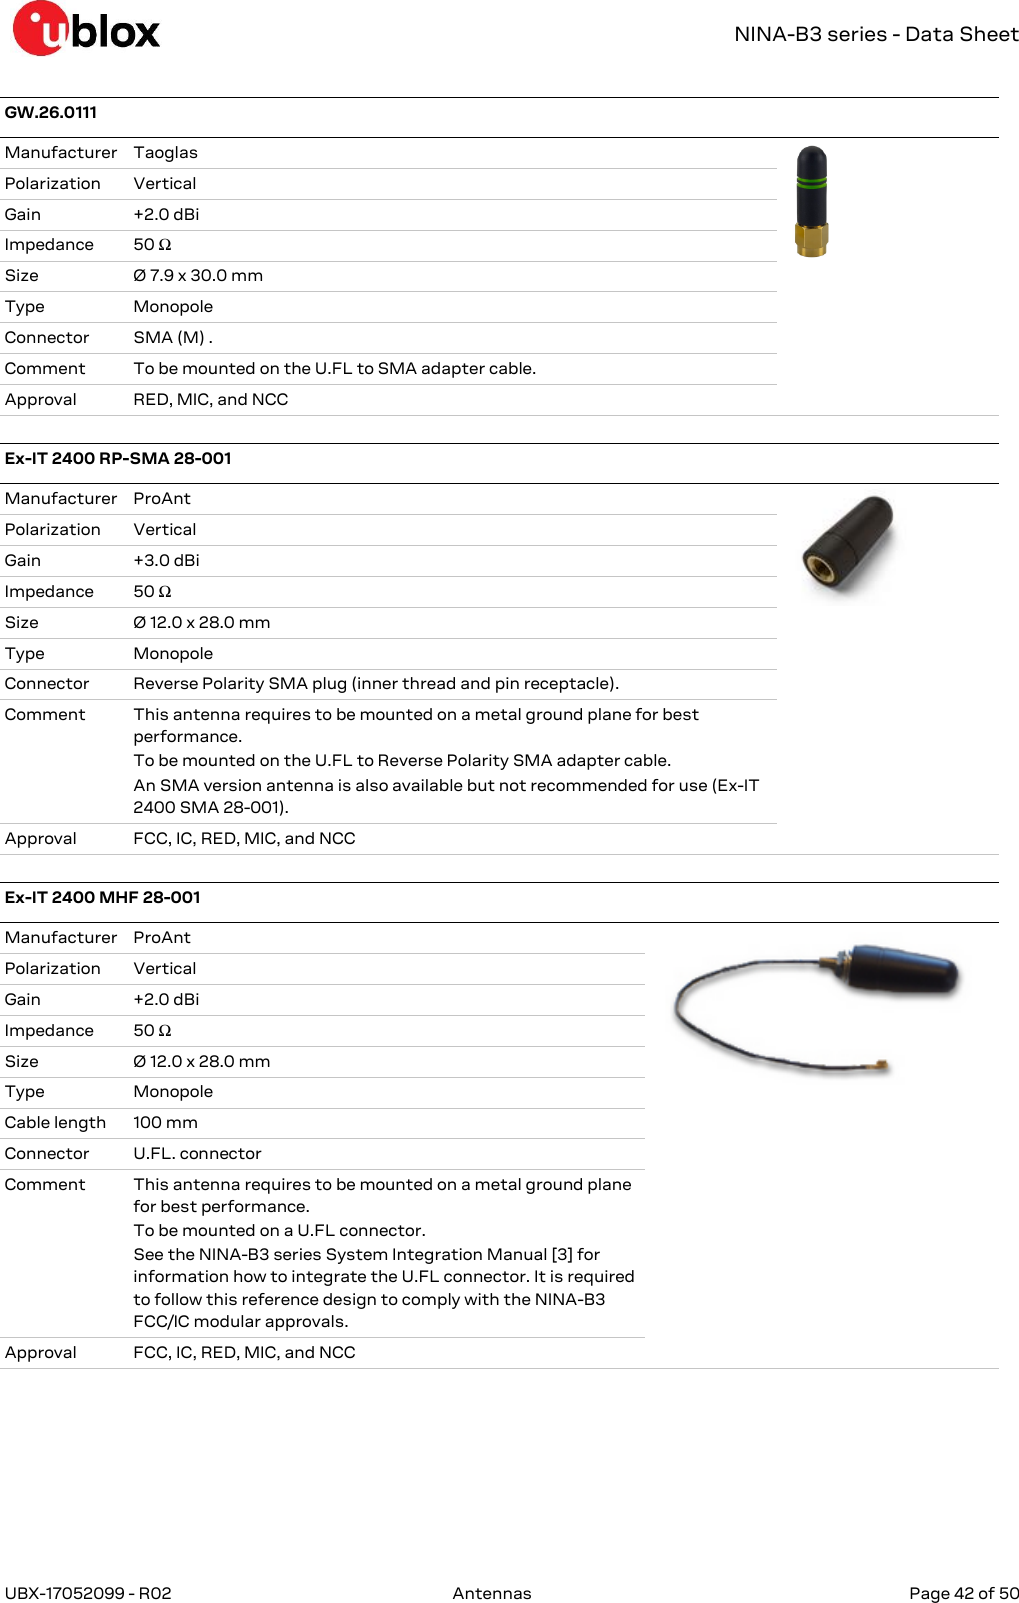   NINA-B3 series - Data Sheet UBX-17052099 - R02  Antennas   Page 42 of 50      GW.26.0111  Manufacturer Taoglas  Polarization Vertical Gain +2.0 dBi Impedance 50 Ω Size Ø 7.9 x 30.0 mm Type Monopole Connector SMA (M) .  Comment To be mounted on the U.FL to SMA adapter cable. Approval RED, MIC, and NCC  Ex-IT 2400 RP-SMA 28-001  Manufacturer ProAnt  Polarization Vertical Gain +3.0 dBi Impedance 50 Ω Size Ø 12.0 x 28.0 mm Type Monopole Connector Reverse Polarity SMA plug (inner thread and pin receptacle).  Comment This antenna requires to be mounted on a metal ground plane for best performance. To be mounted on the U.FL to Reverse Polarity SMA adapter cable. An SMA version antenna is also available but not recommended for use (Ex-IT 2400 SMA 28-001). Approval FCC, IC, RED, MIC, and NCC  Ex-IT 2400 MHF 28-001  Manufacturer ProAnt  Polarization Vertical Gain +2.0 dBi Impedance 50 Ω Size Ø 12.0 x 28.0 mm Type Monopole Cable length 100 mm Connector U.FL. connector  Comment This antenna requires to be mounted on a metal ground plane for best performance. To be mounted on a U.FL connector.  See the NINA-B3 series System Integration Manual [3] for information how to integrate the U.FL connector. It is required to follow this reference design to comply with the NINA-B3 FCC/IC modular approvals.  Approval FCC, IC, RED, MIC, and NCC  